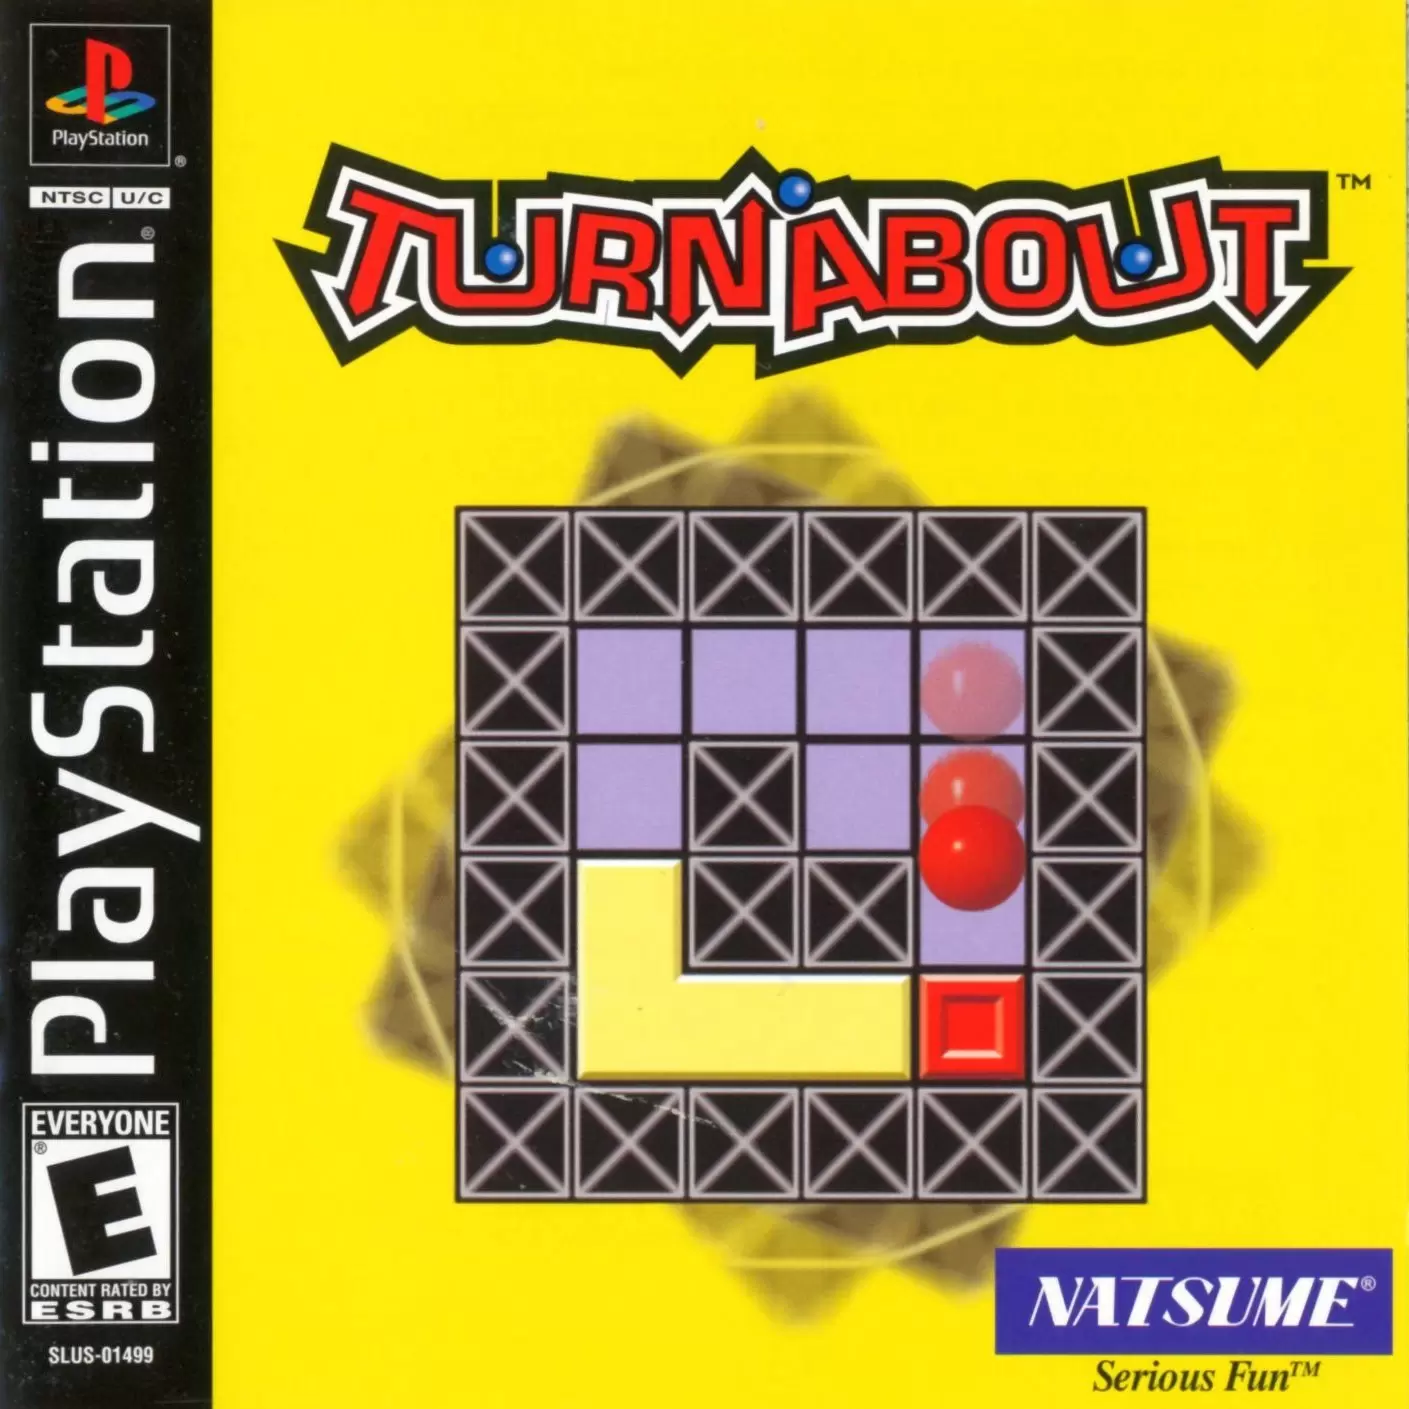 Playstation games - Turnabout